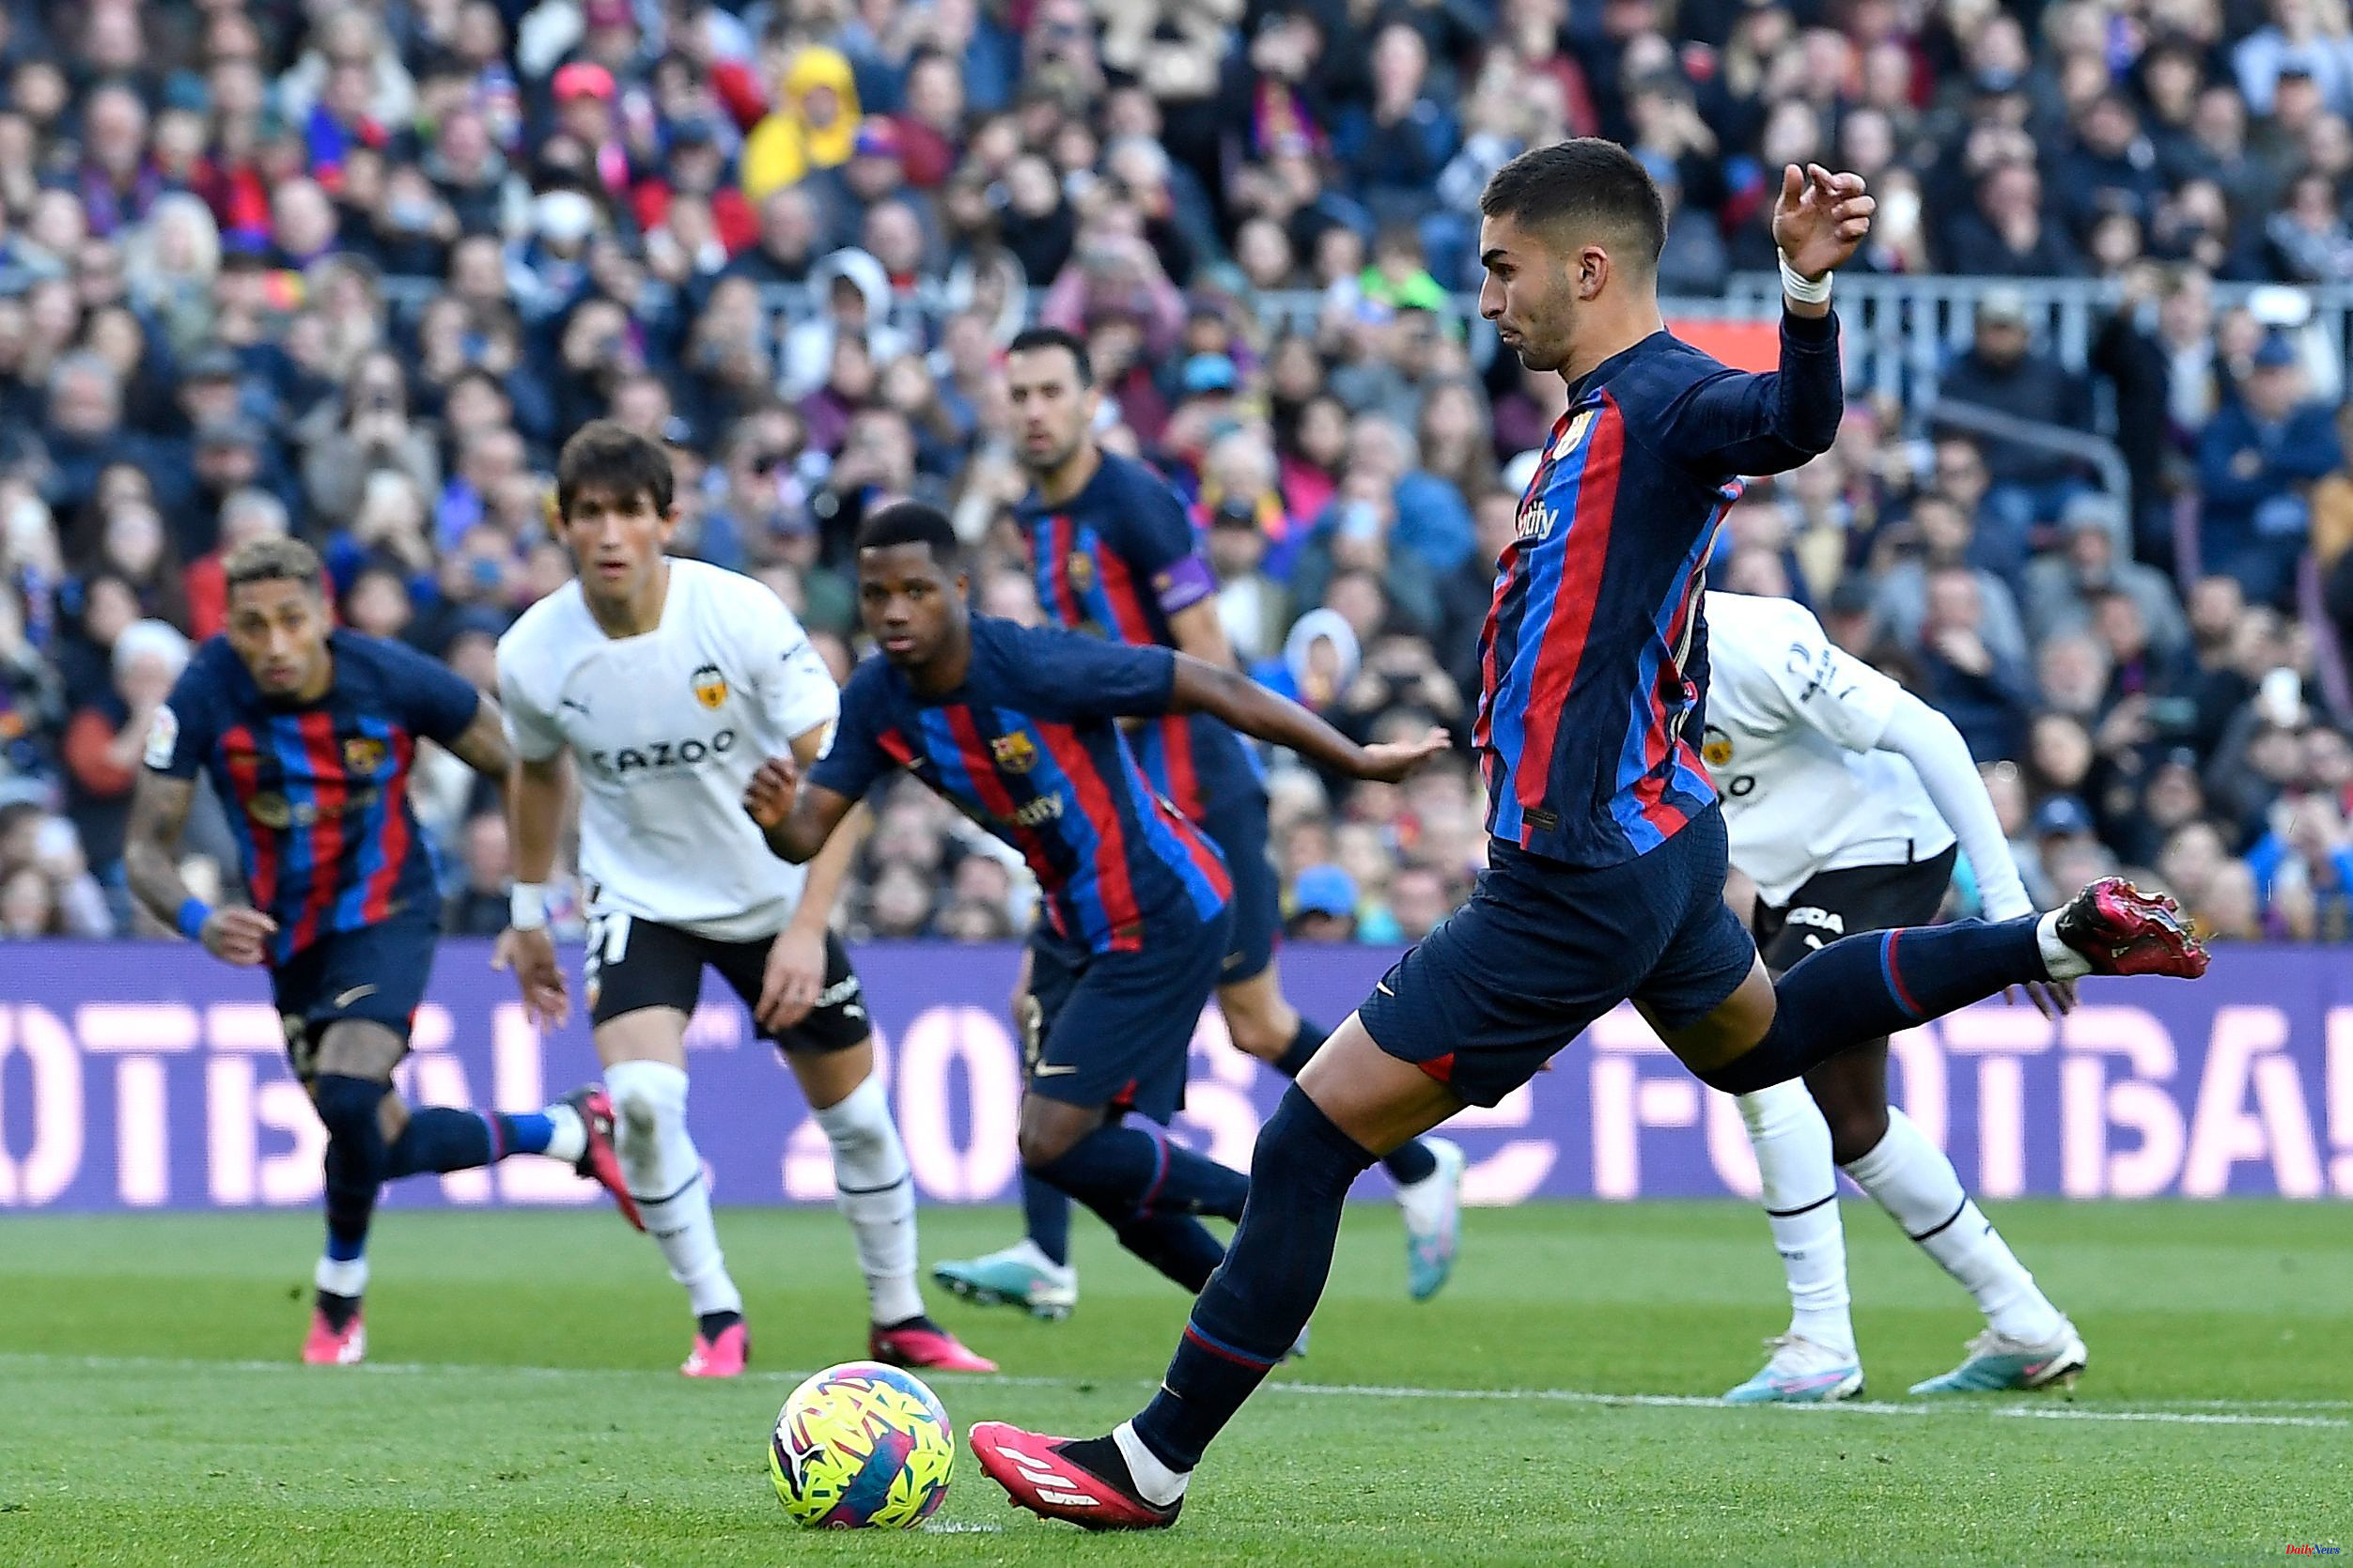 Sports Athletic-Barcelona: schedule and where to watch the LaLiga match on TV